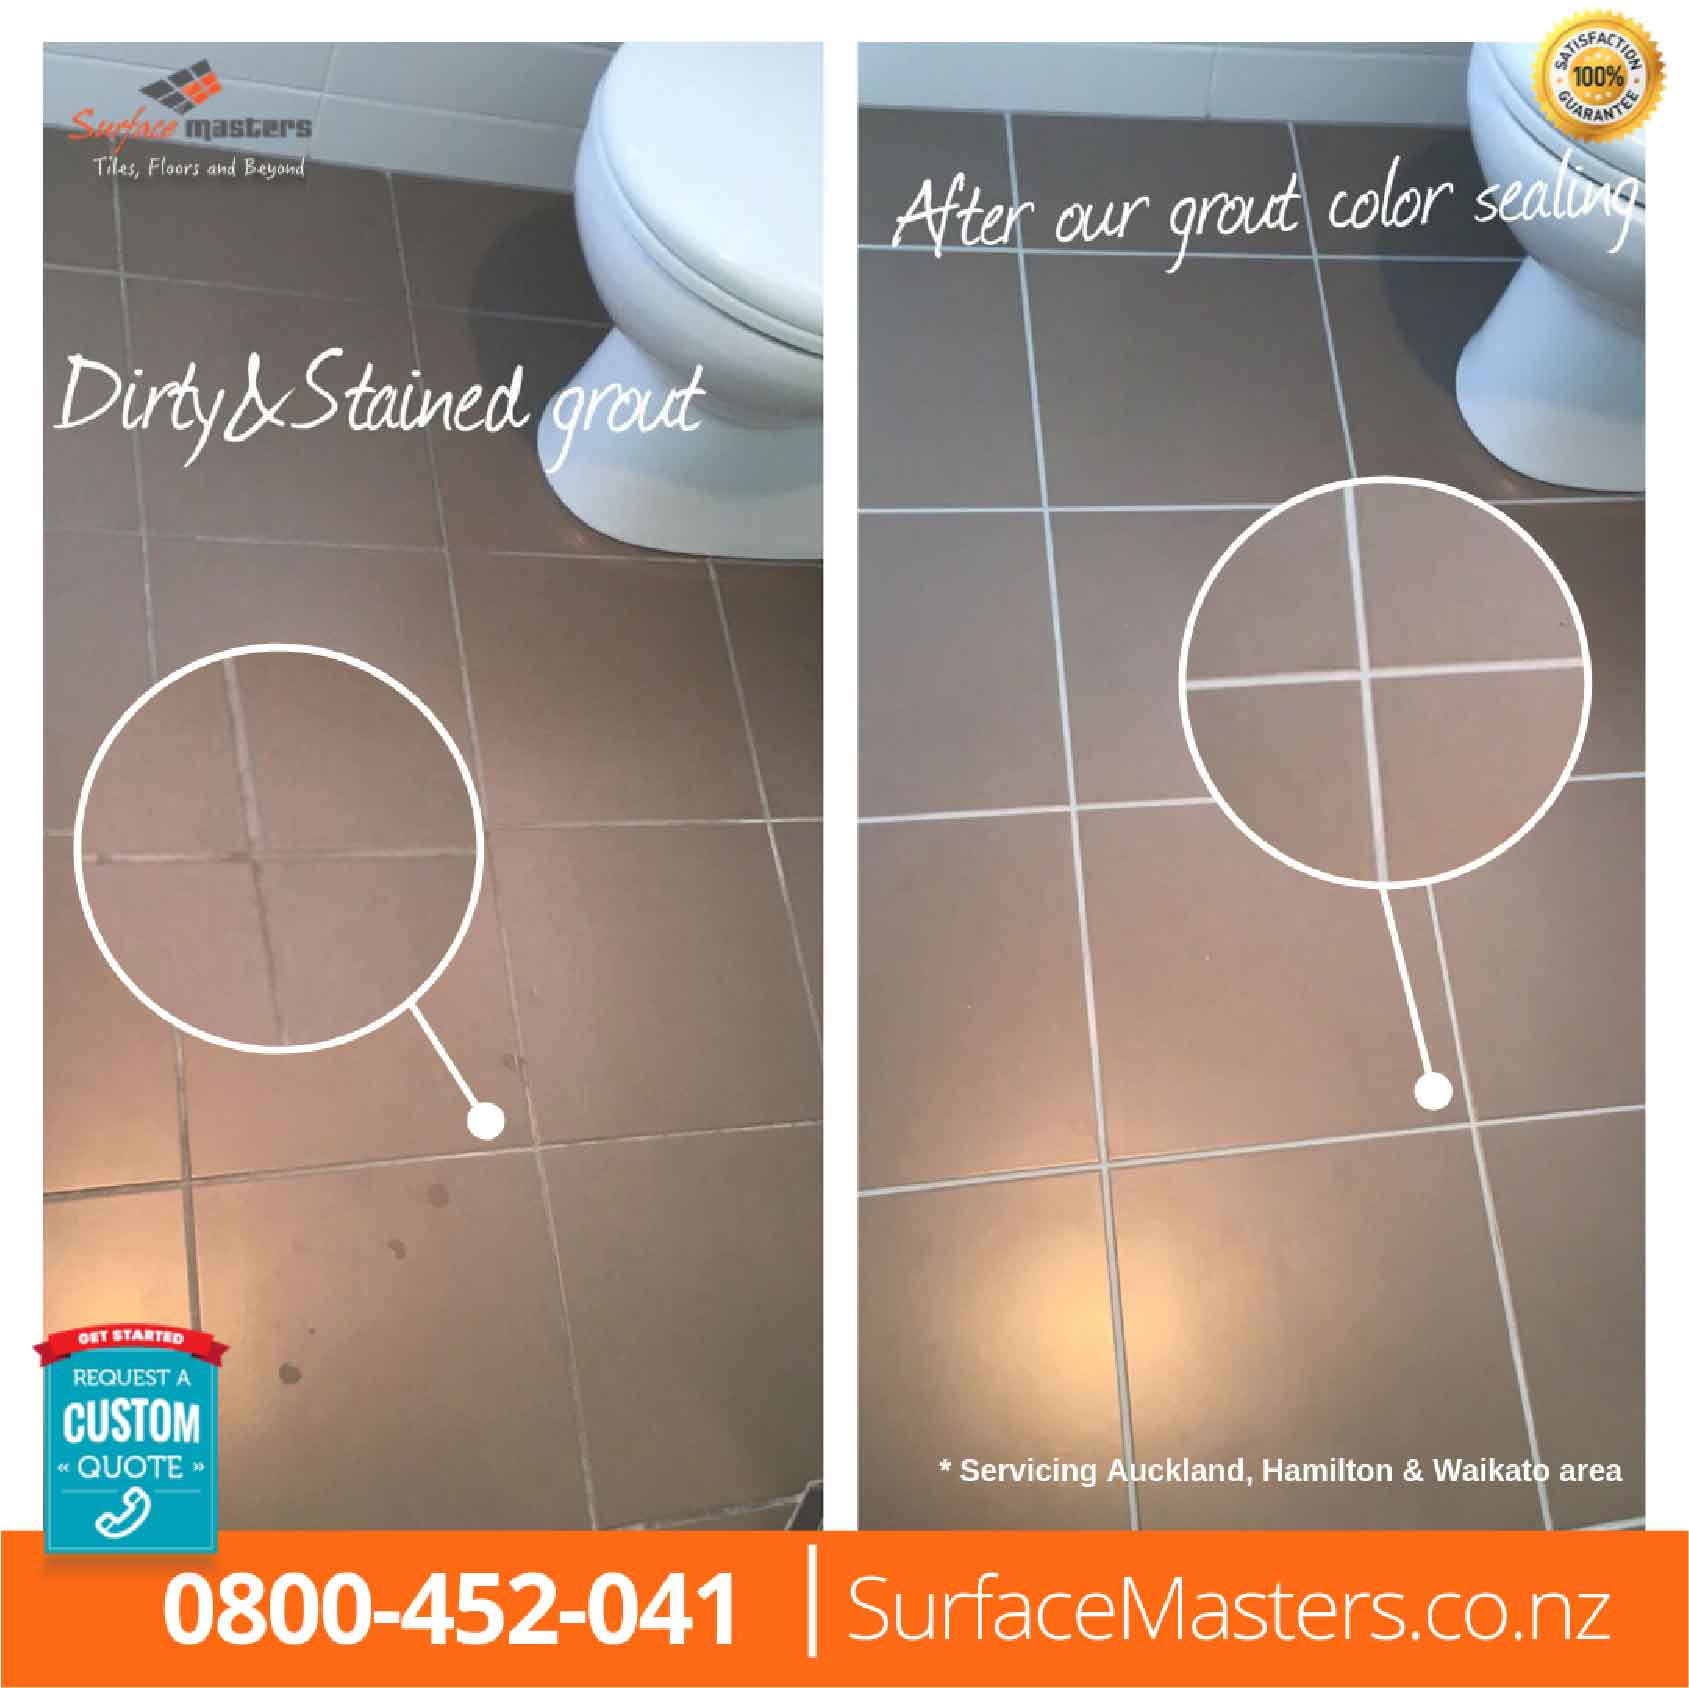 Before After picture of Tiled Floor After Doing grout Sealing by surface masters